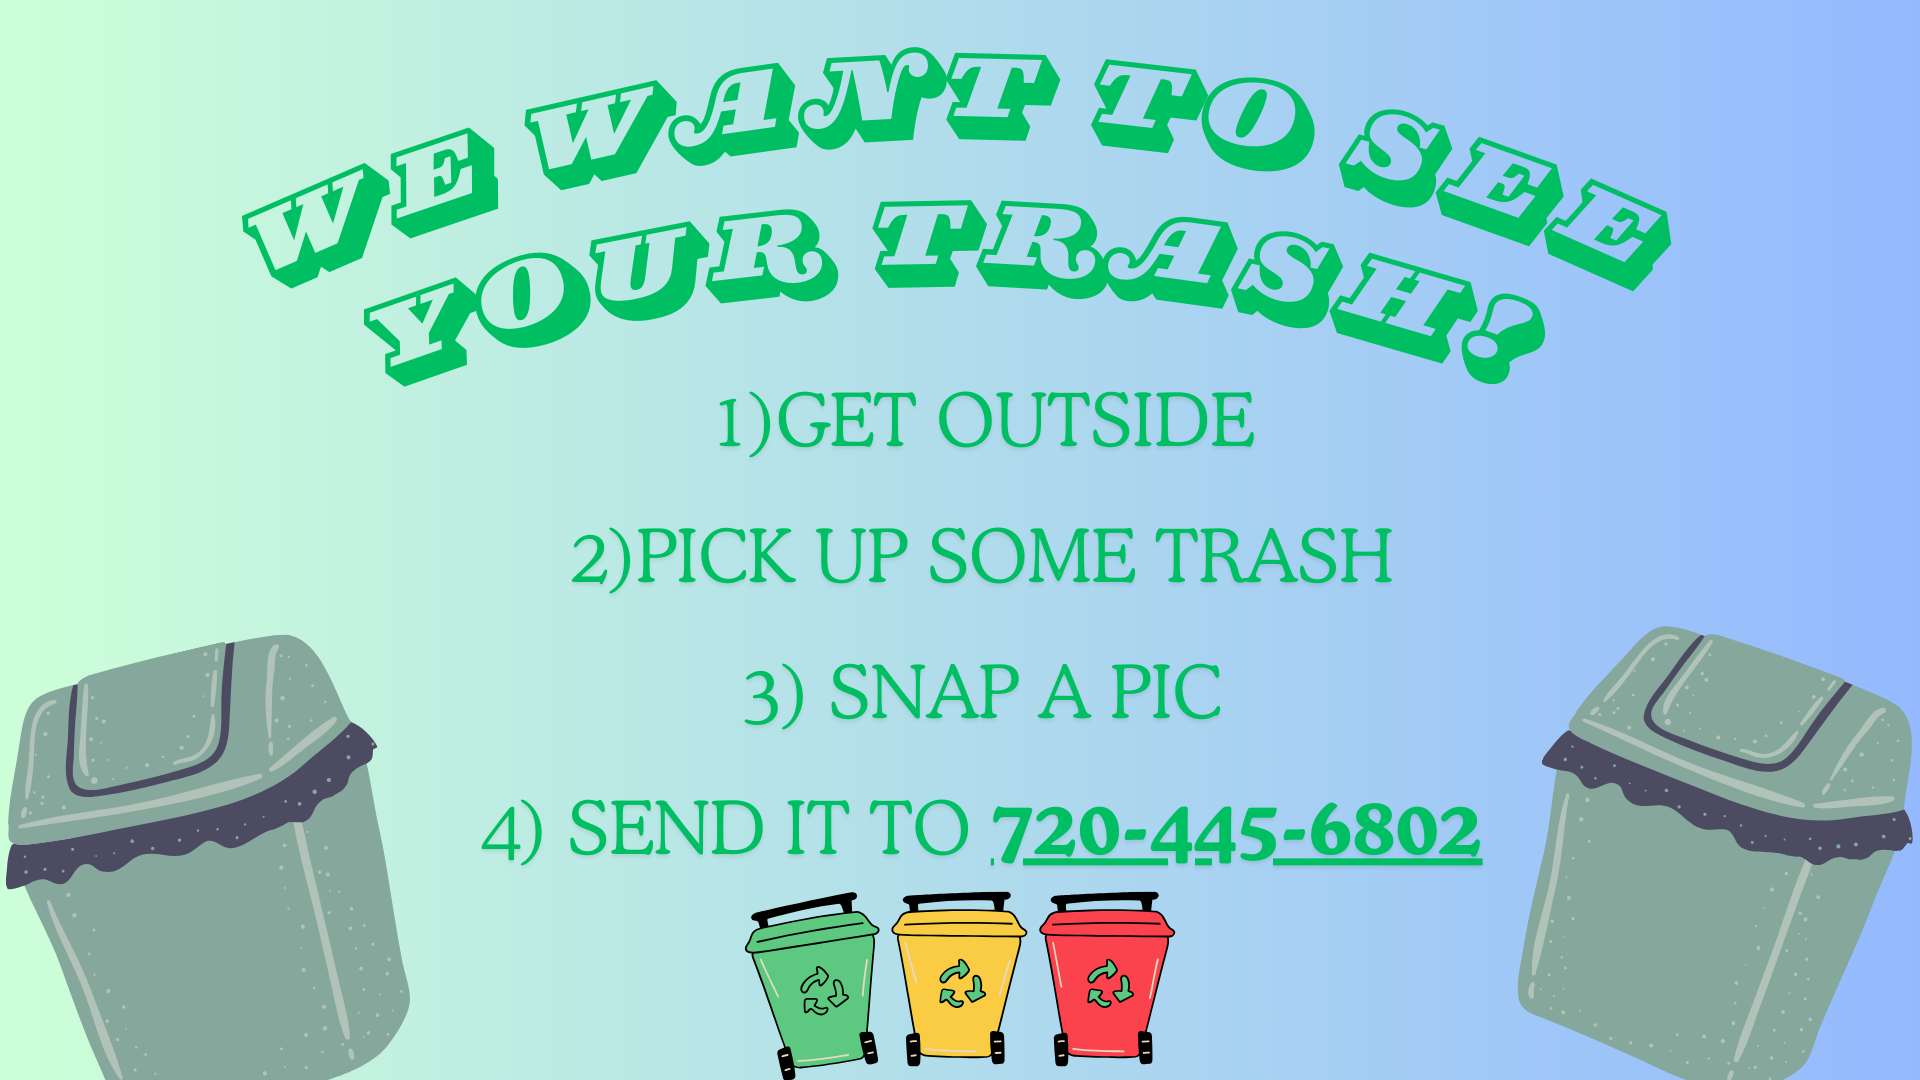 We Want To See Your Trash! (1920 x 1080 px).png